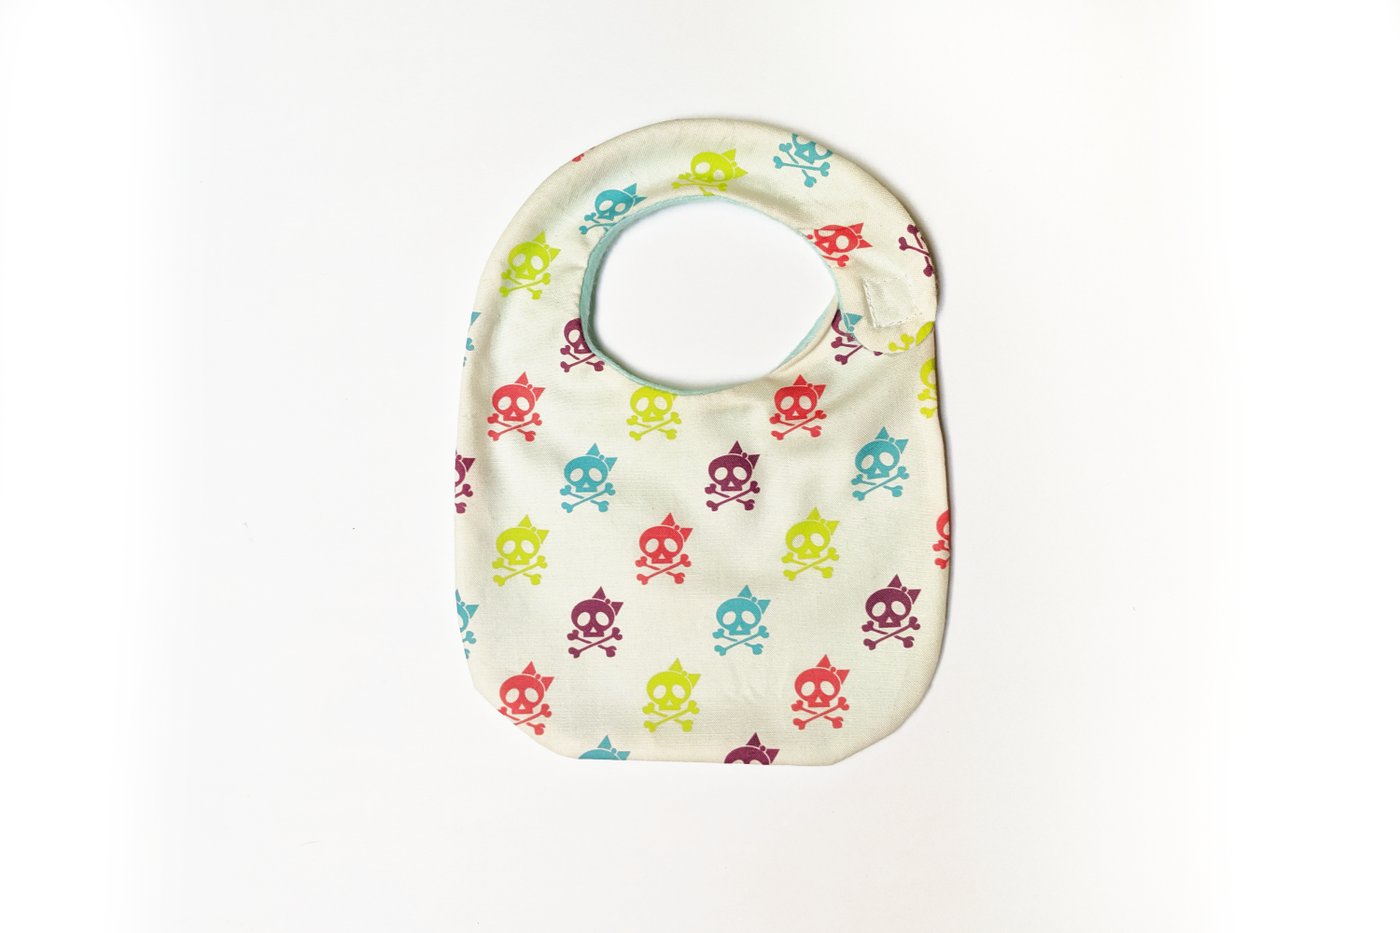 A baby bib sits on a white surface. The fabric is off-white with a pattern of cute skulls with bows in lime green, turquoise, hot pink, and purple.